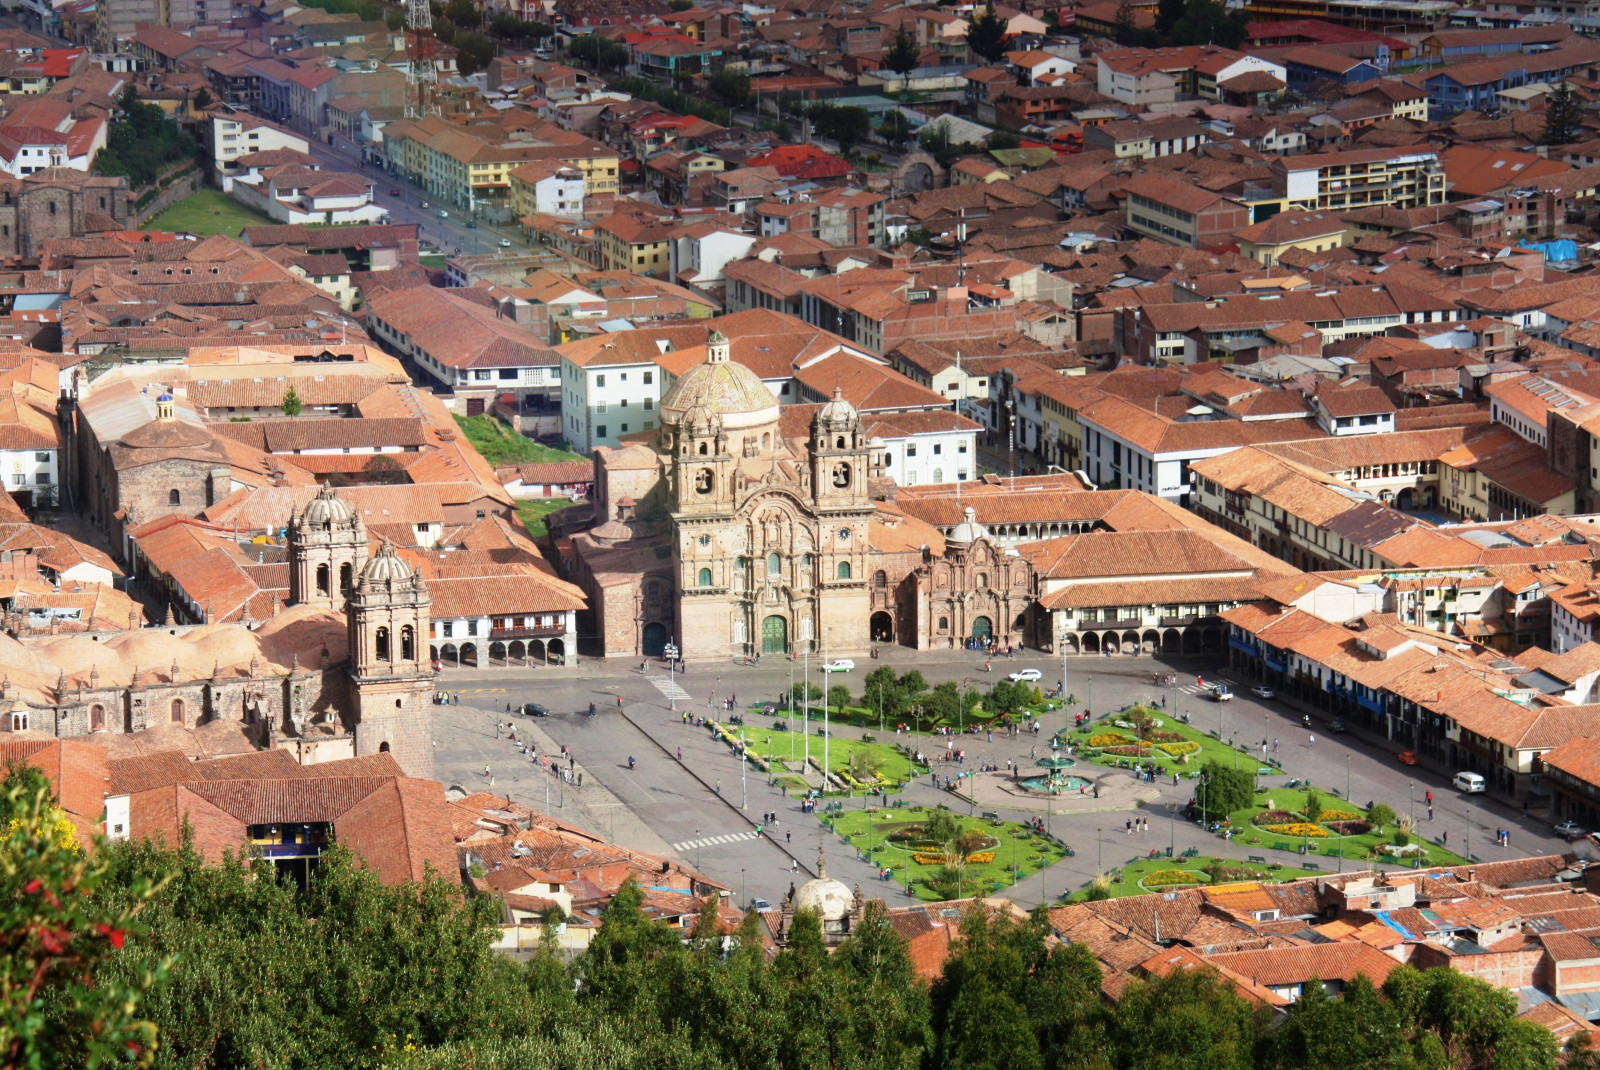 birdseye view of a cluster of tan buildings with orange roofs in cusco peru with large green grass square and trees